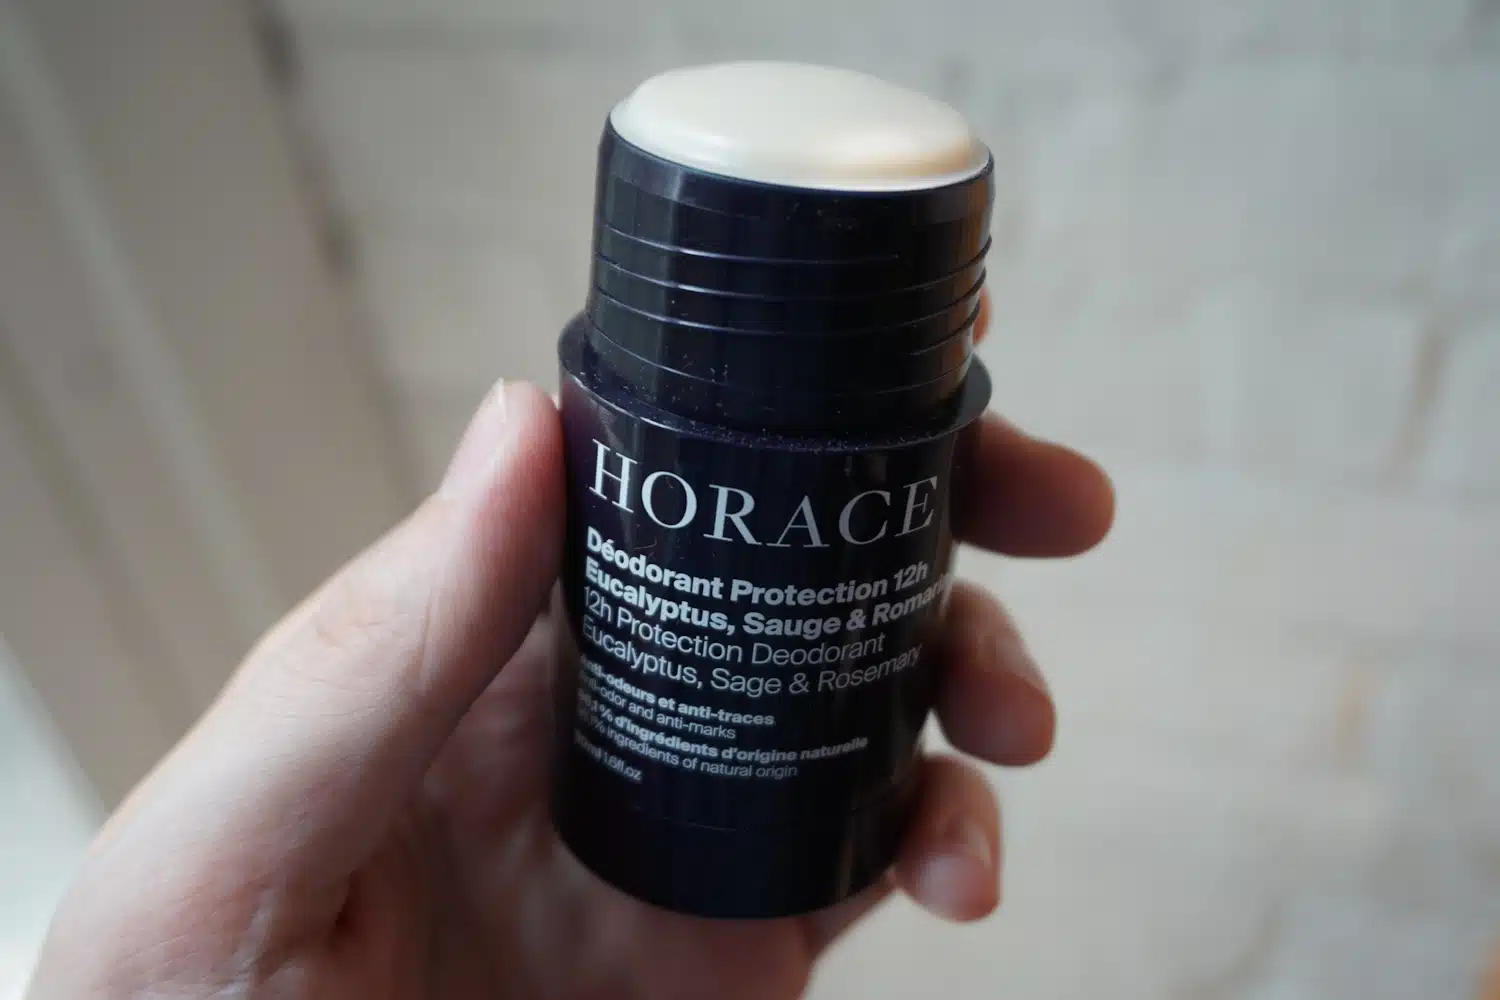 Horace 12h Protection Deodorant